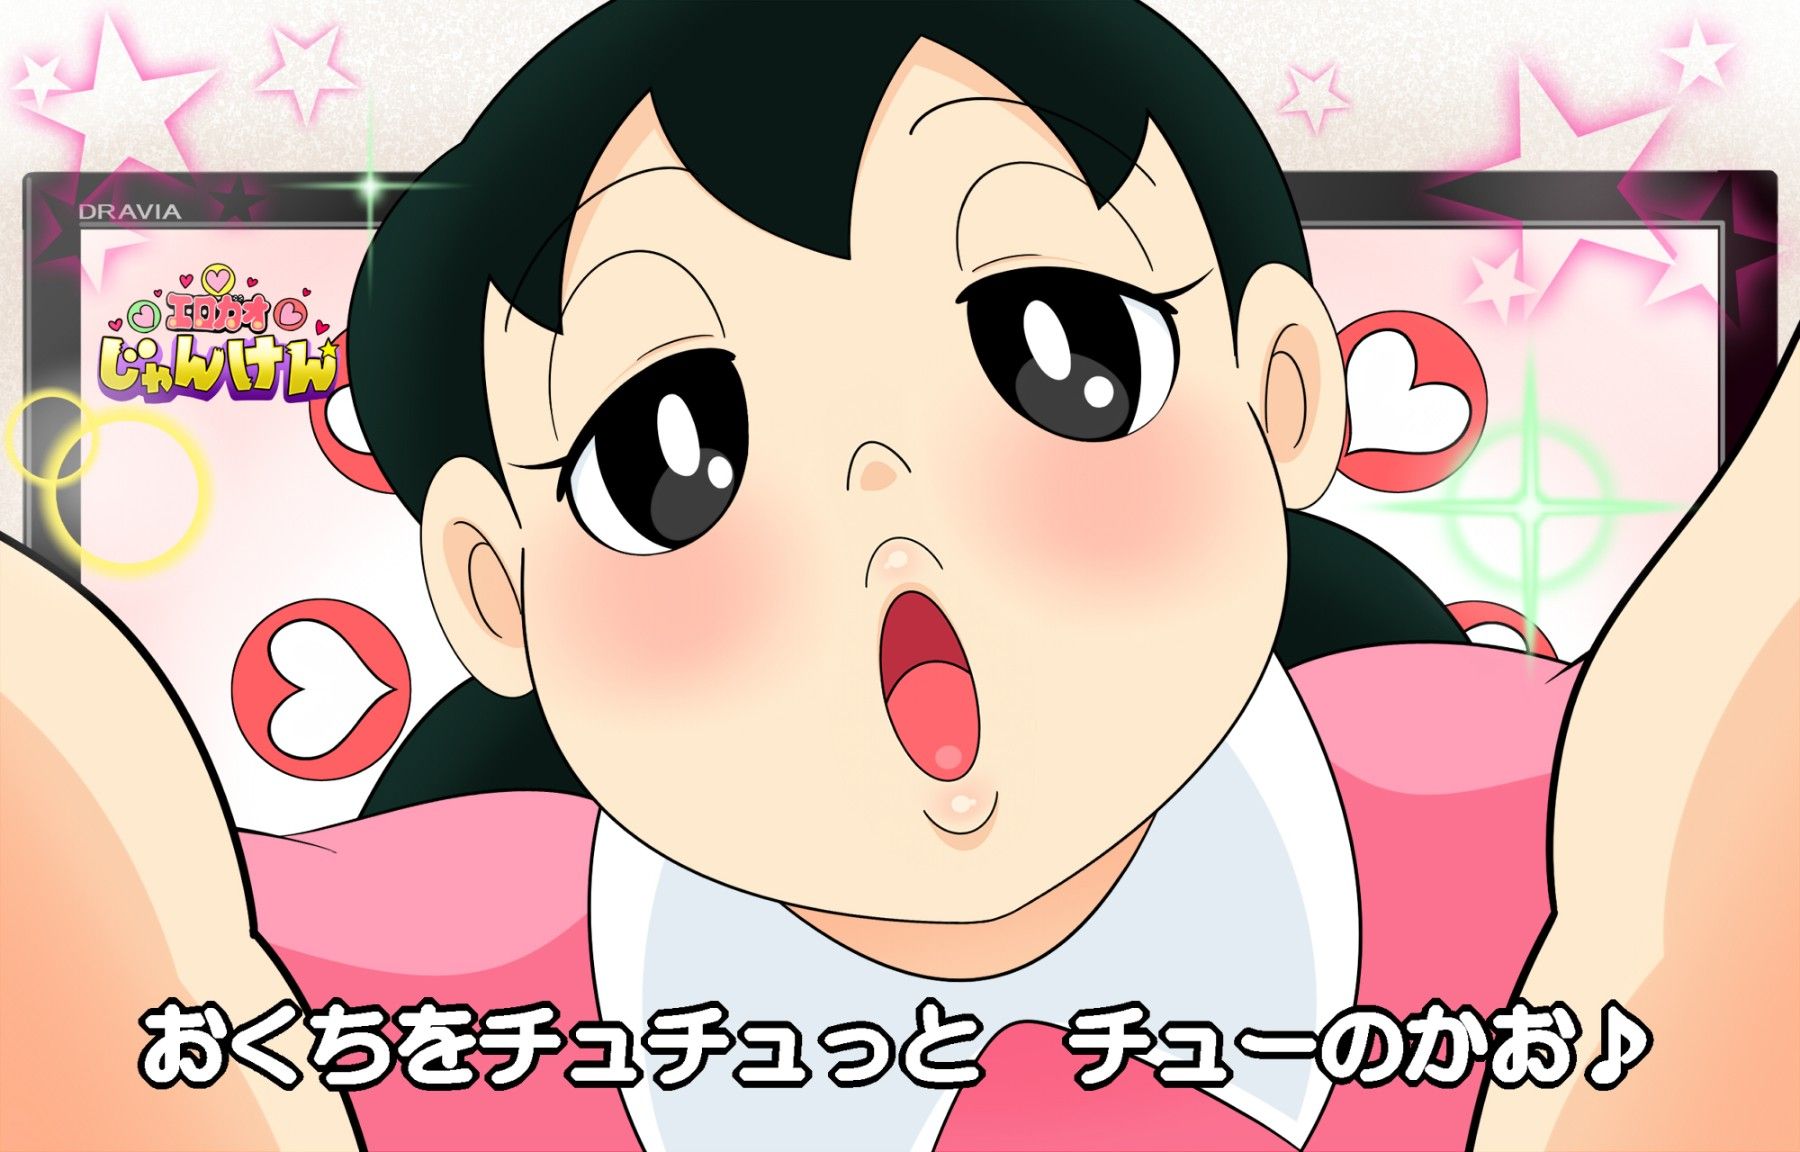 【Doraemon】High-quality erotic images that can be made into Shizuka's wallpaper (PC / smartphone) 16